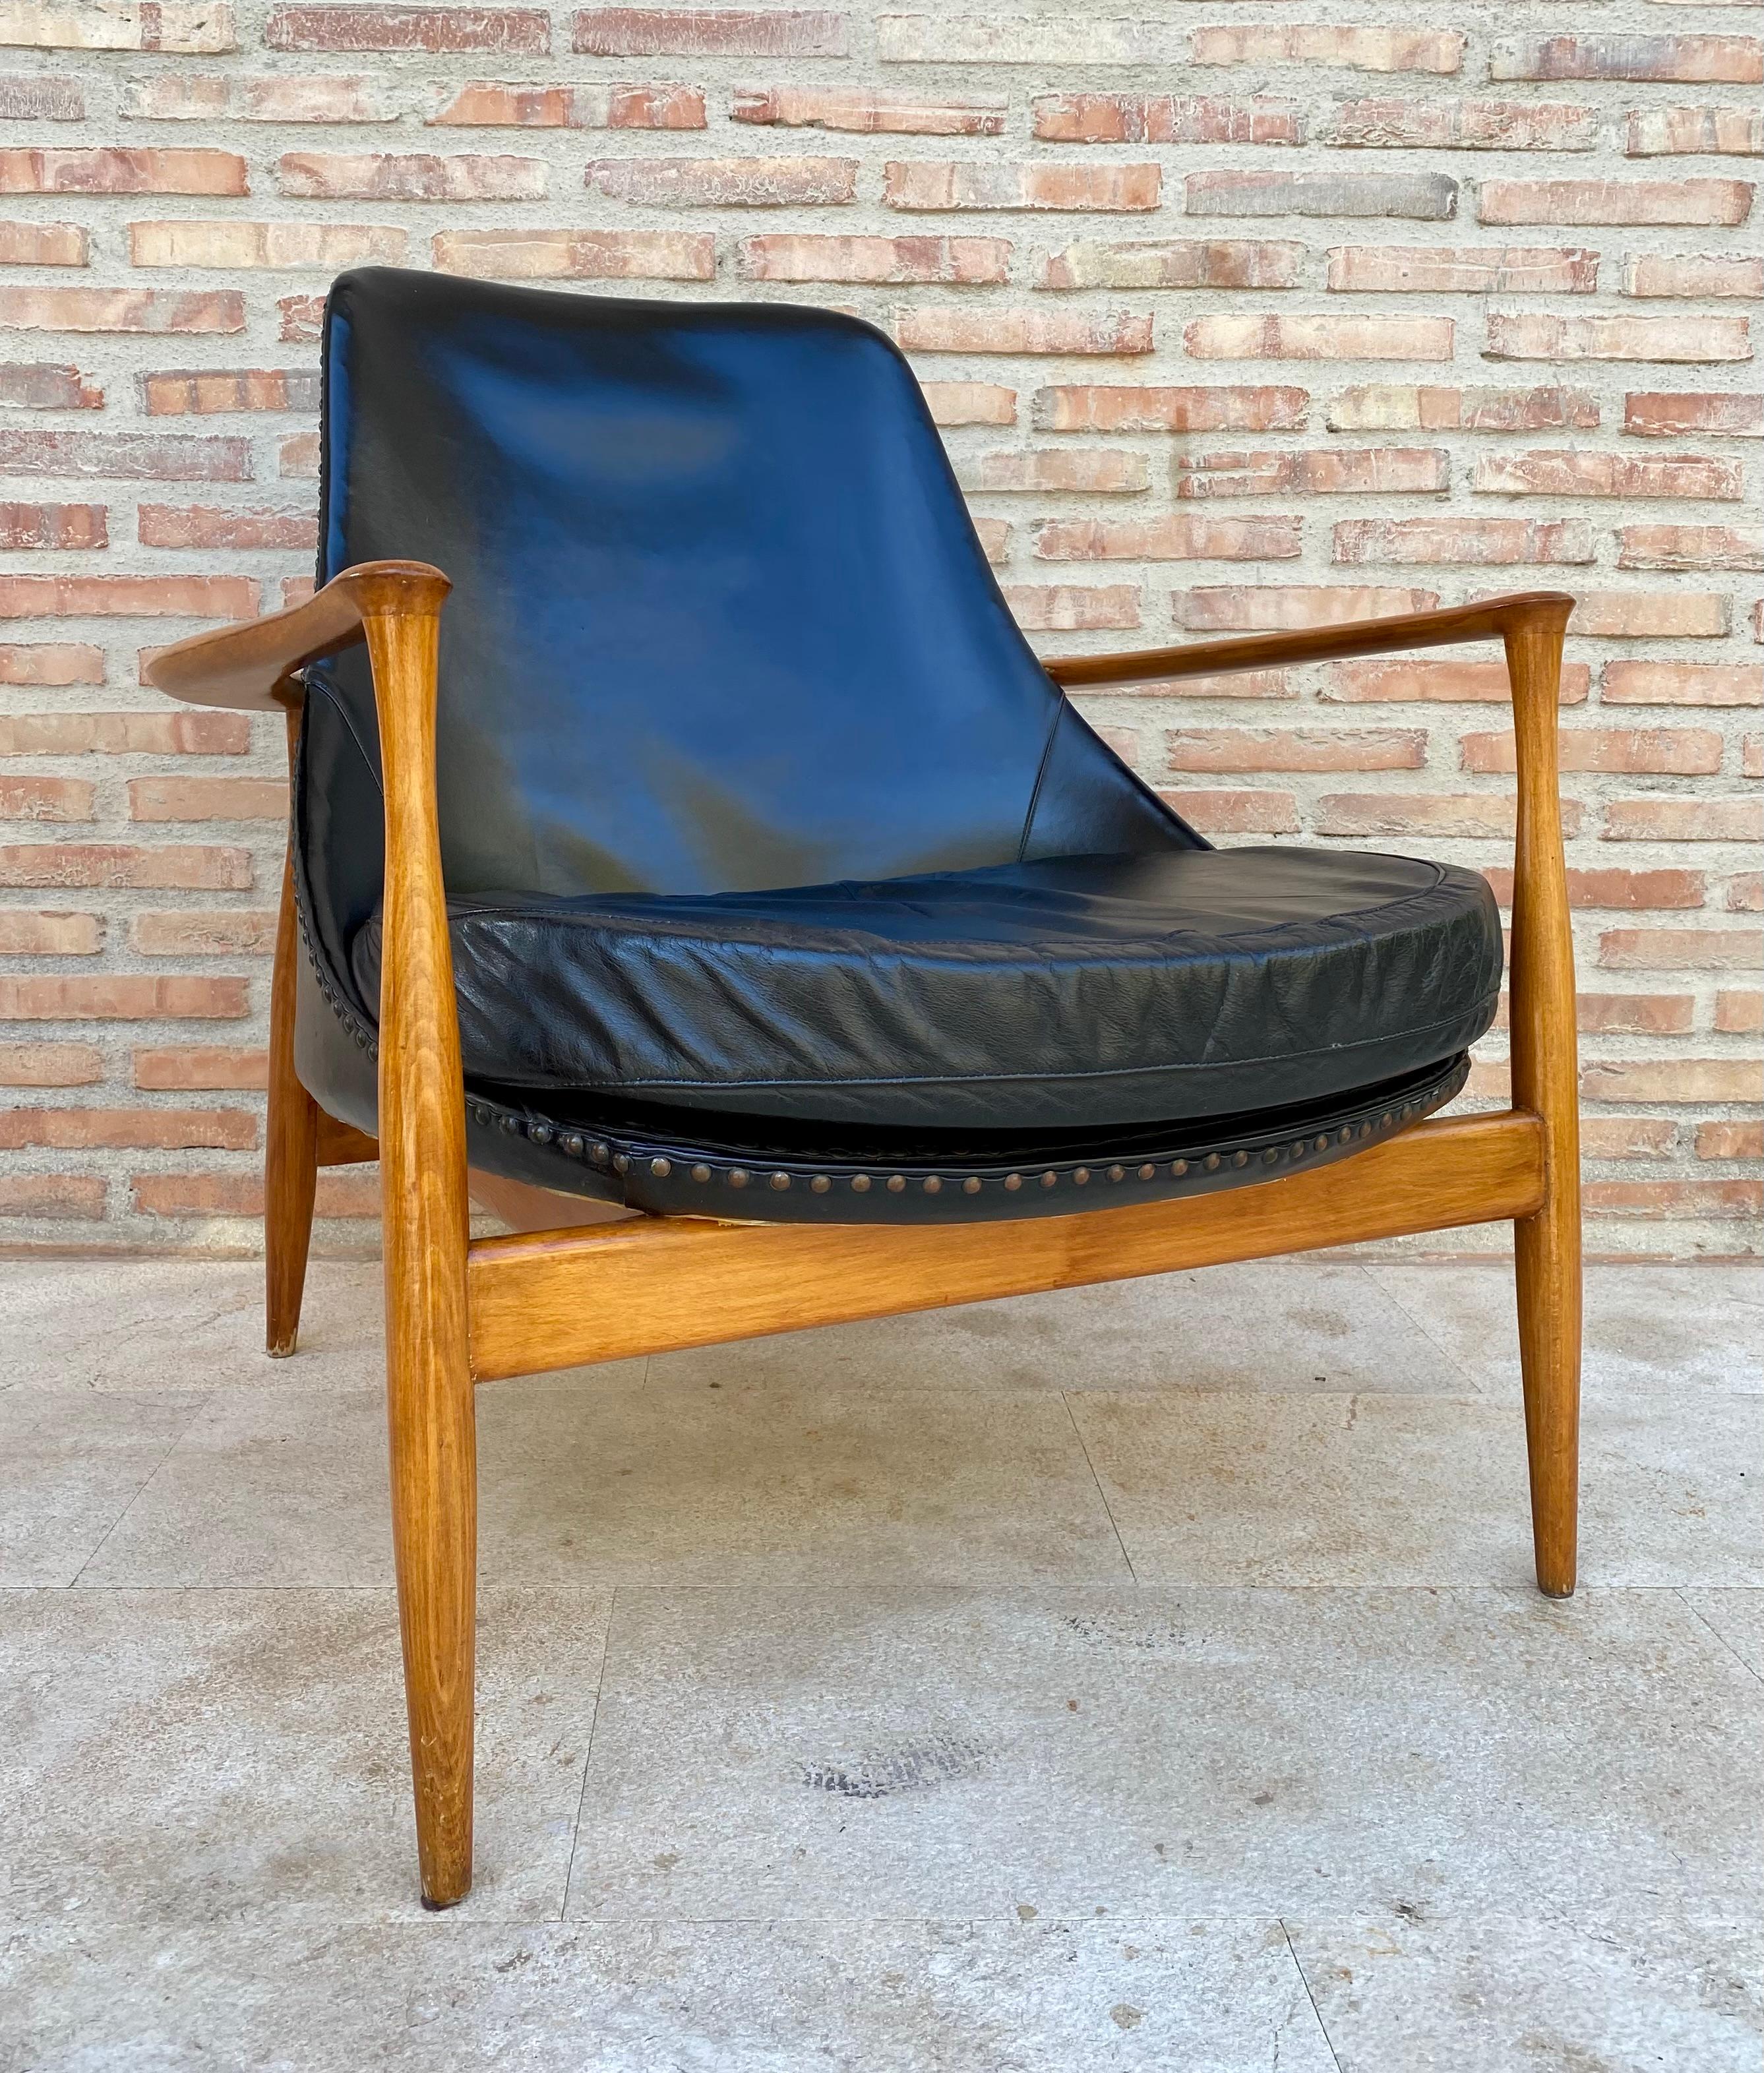 Acclaimed design by Ib Kofod-Larsen, the sculptural wooden frame is sublime. Excellent original finish with minor age wear, original leather upholstery in very good condition. 
This piece is attributed to the mentioned designer/maker. It has no